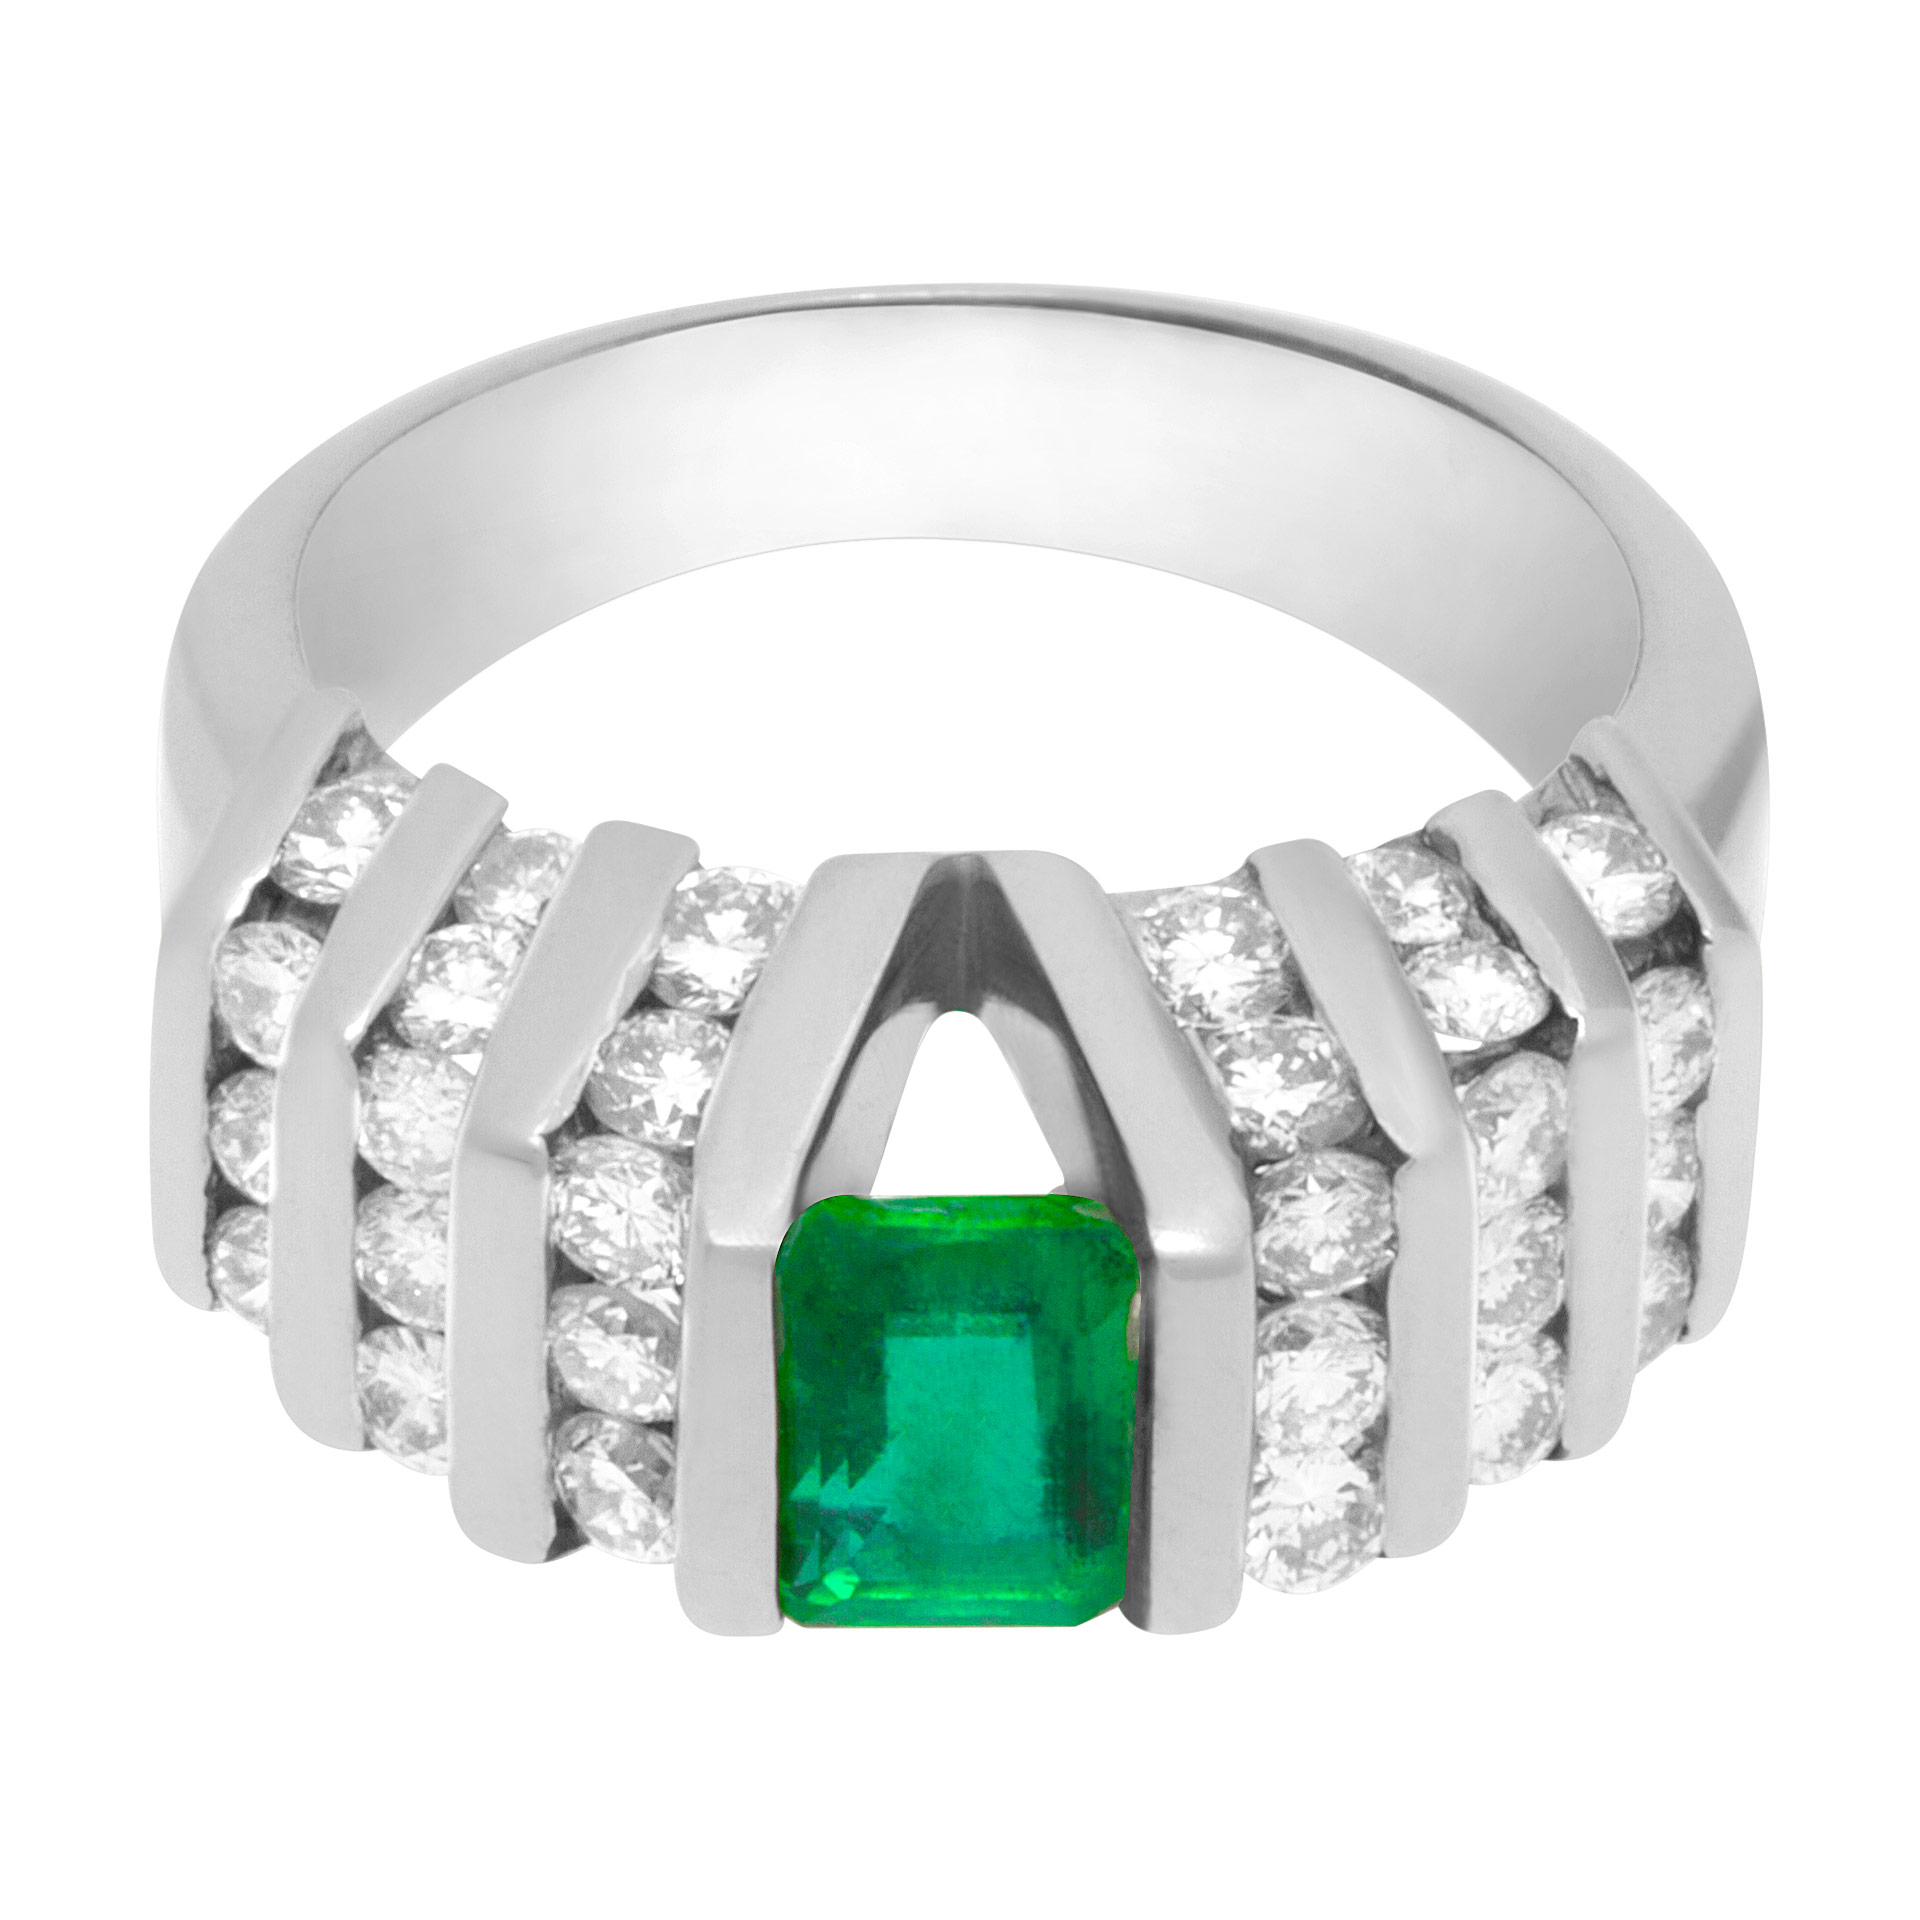 Emerald and diamond ring in 14k white gold w/ approx. 0.75 ct emerald and 1.14 cts in diamonds.